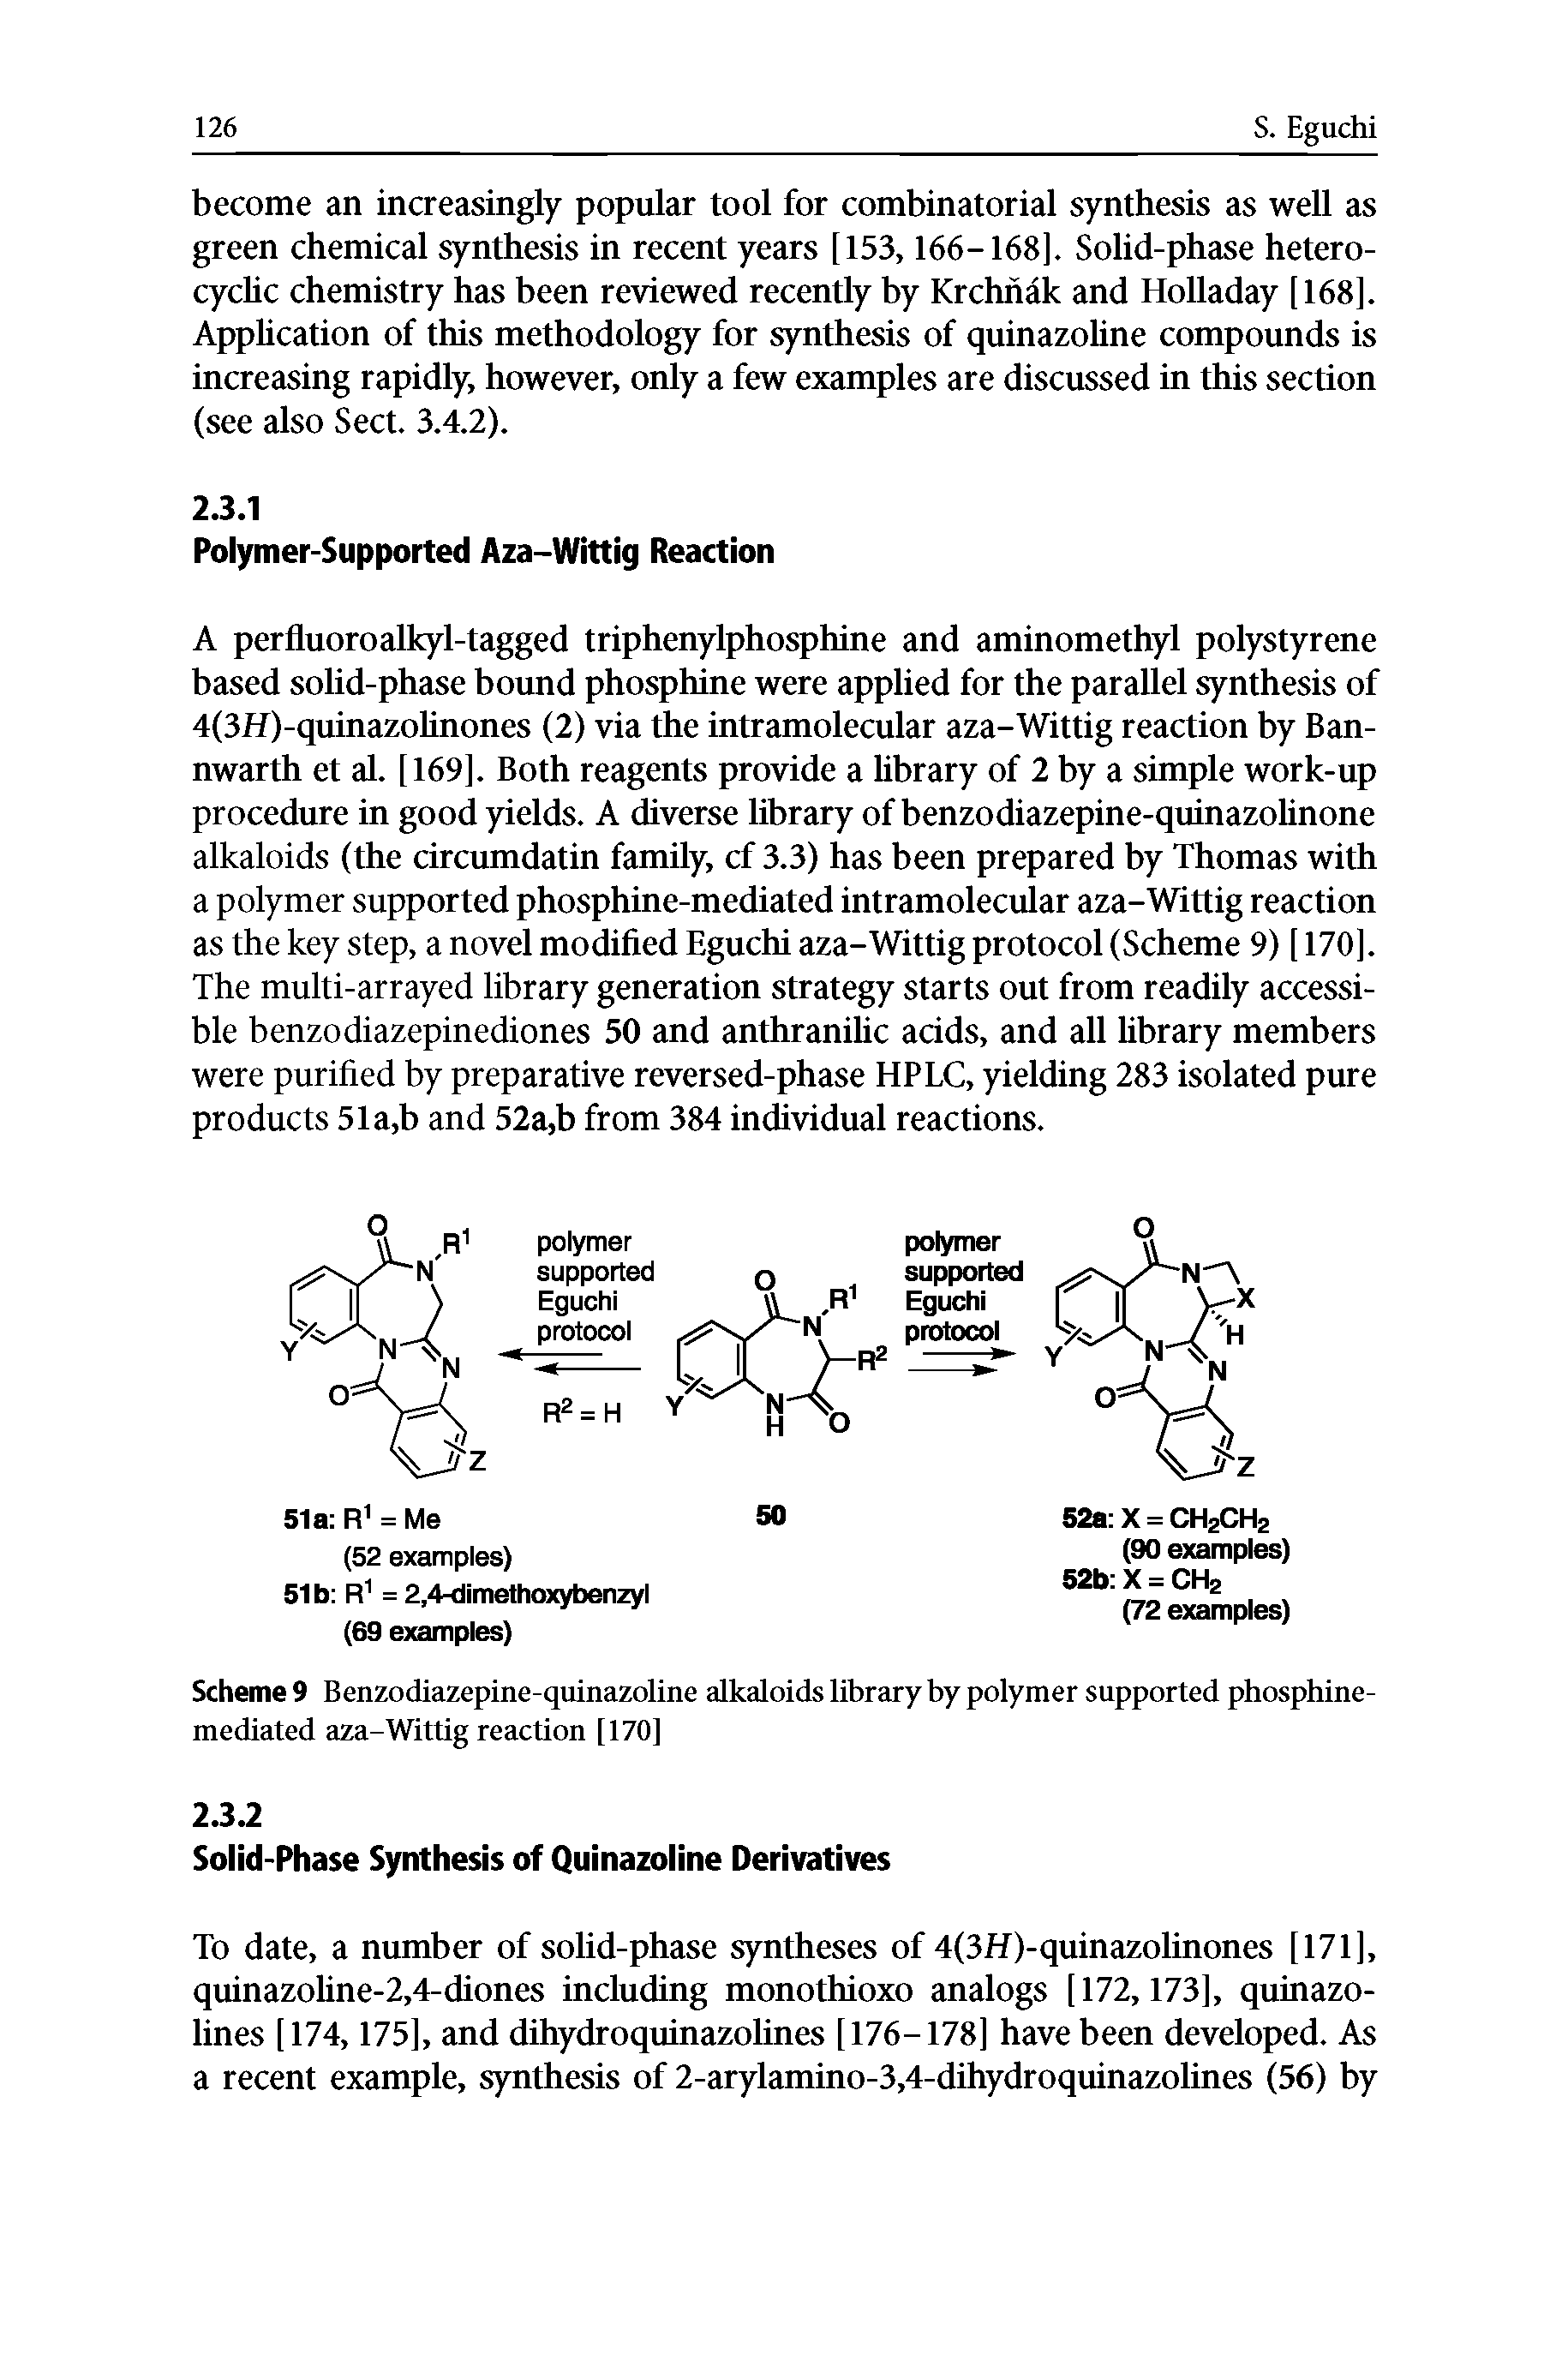 Scheme 9 Benzodiazepine-quinazoline alkaloids library by polymer supported phosphine-mediated aza-Wittig reaction [170]...